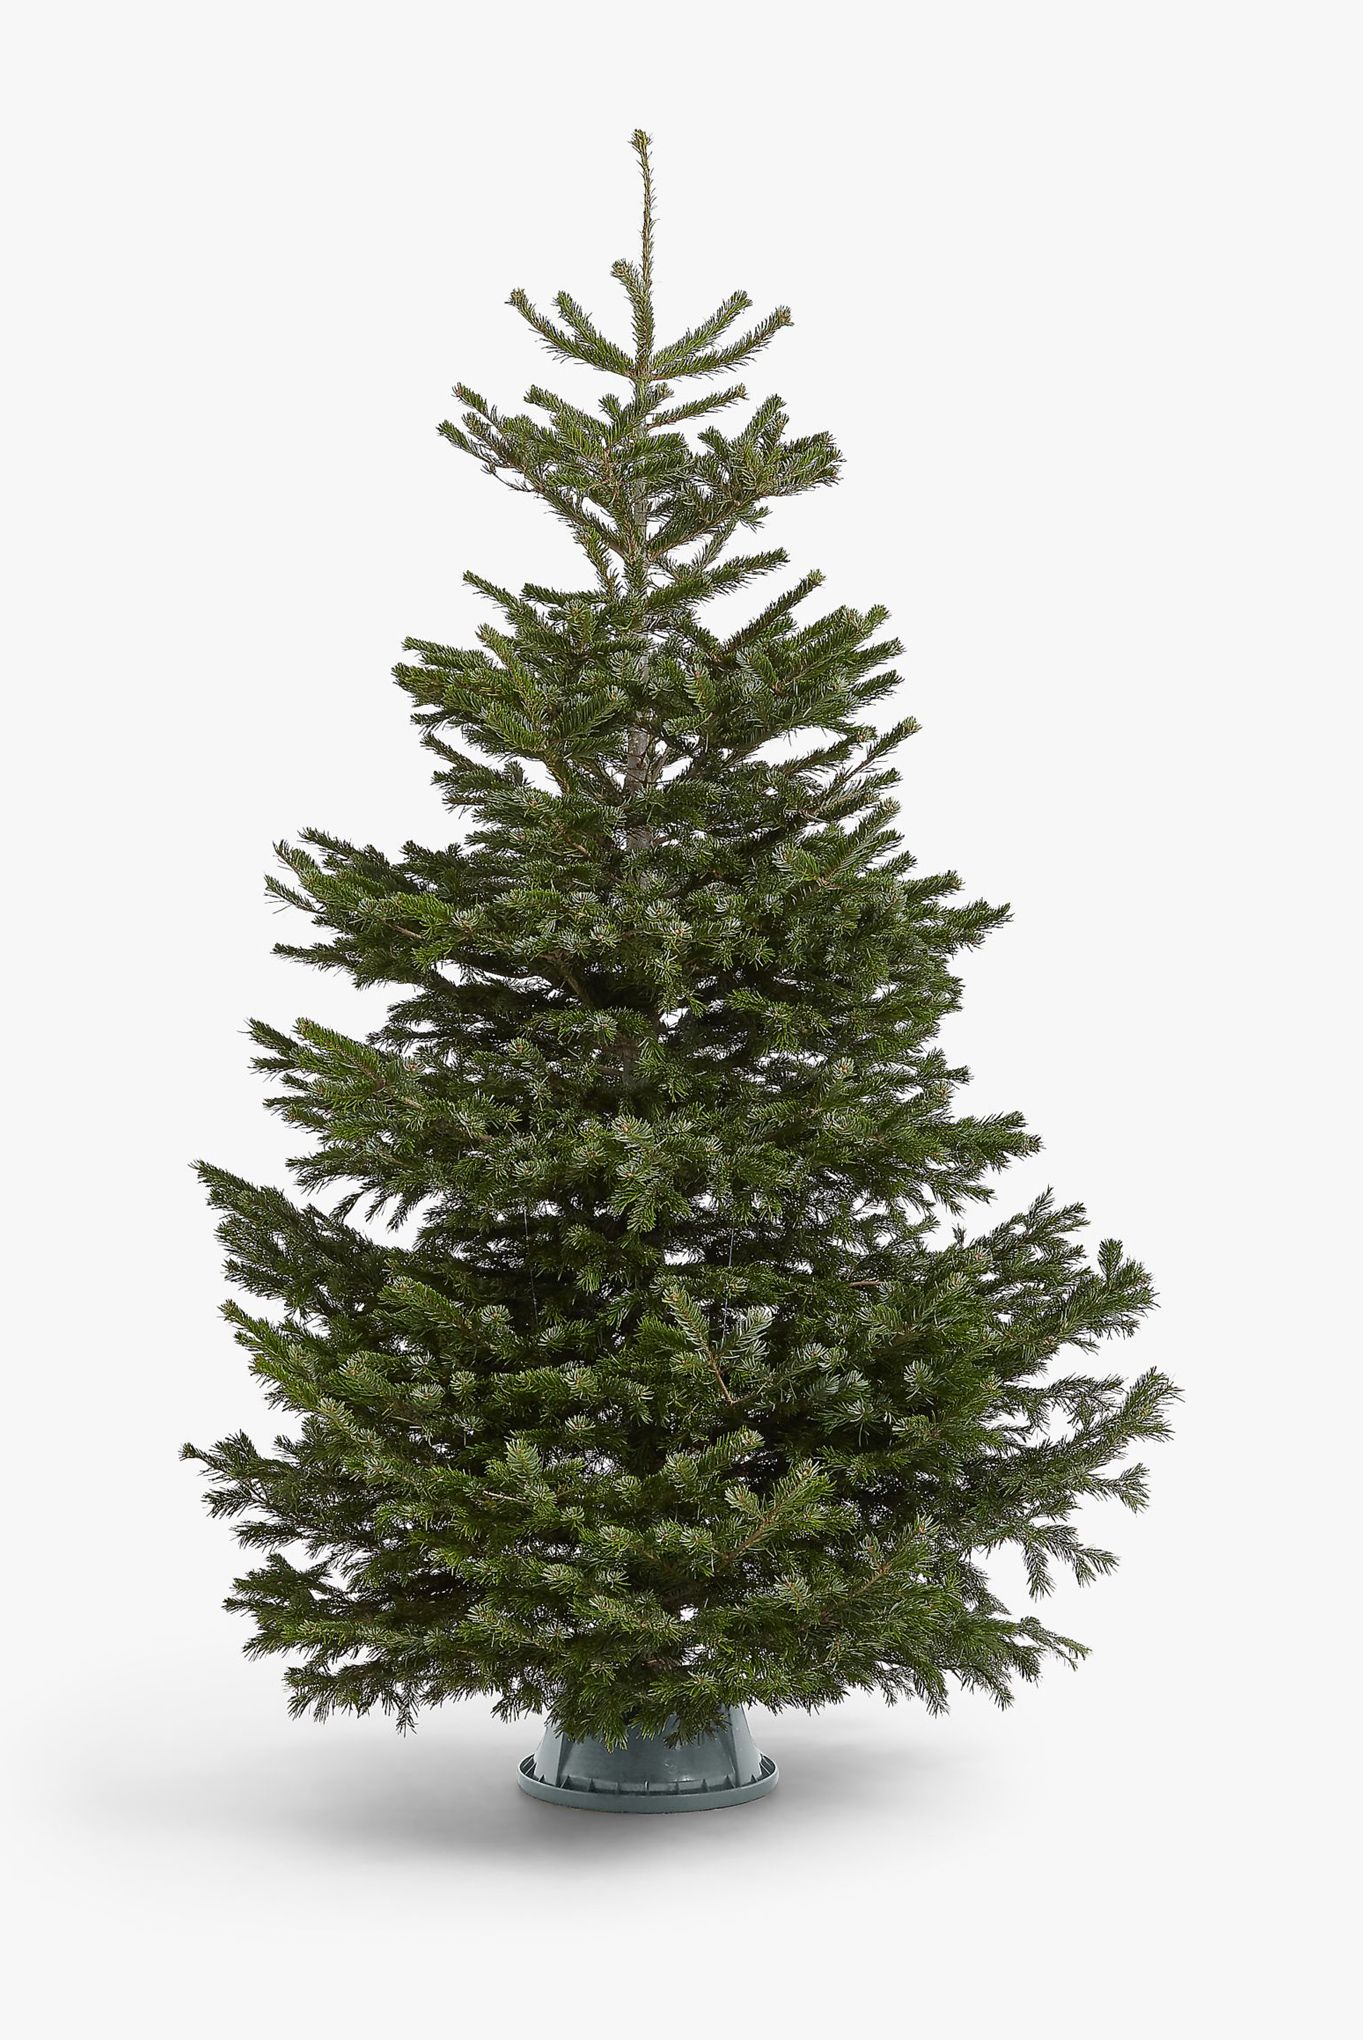 Get a sustainable Christmas tree